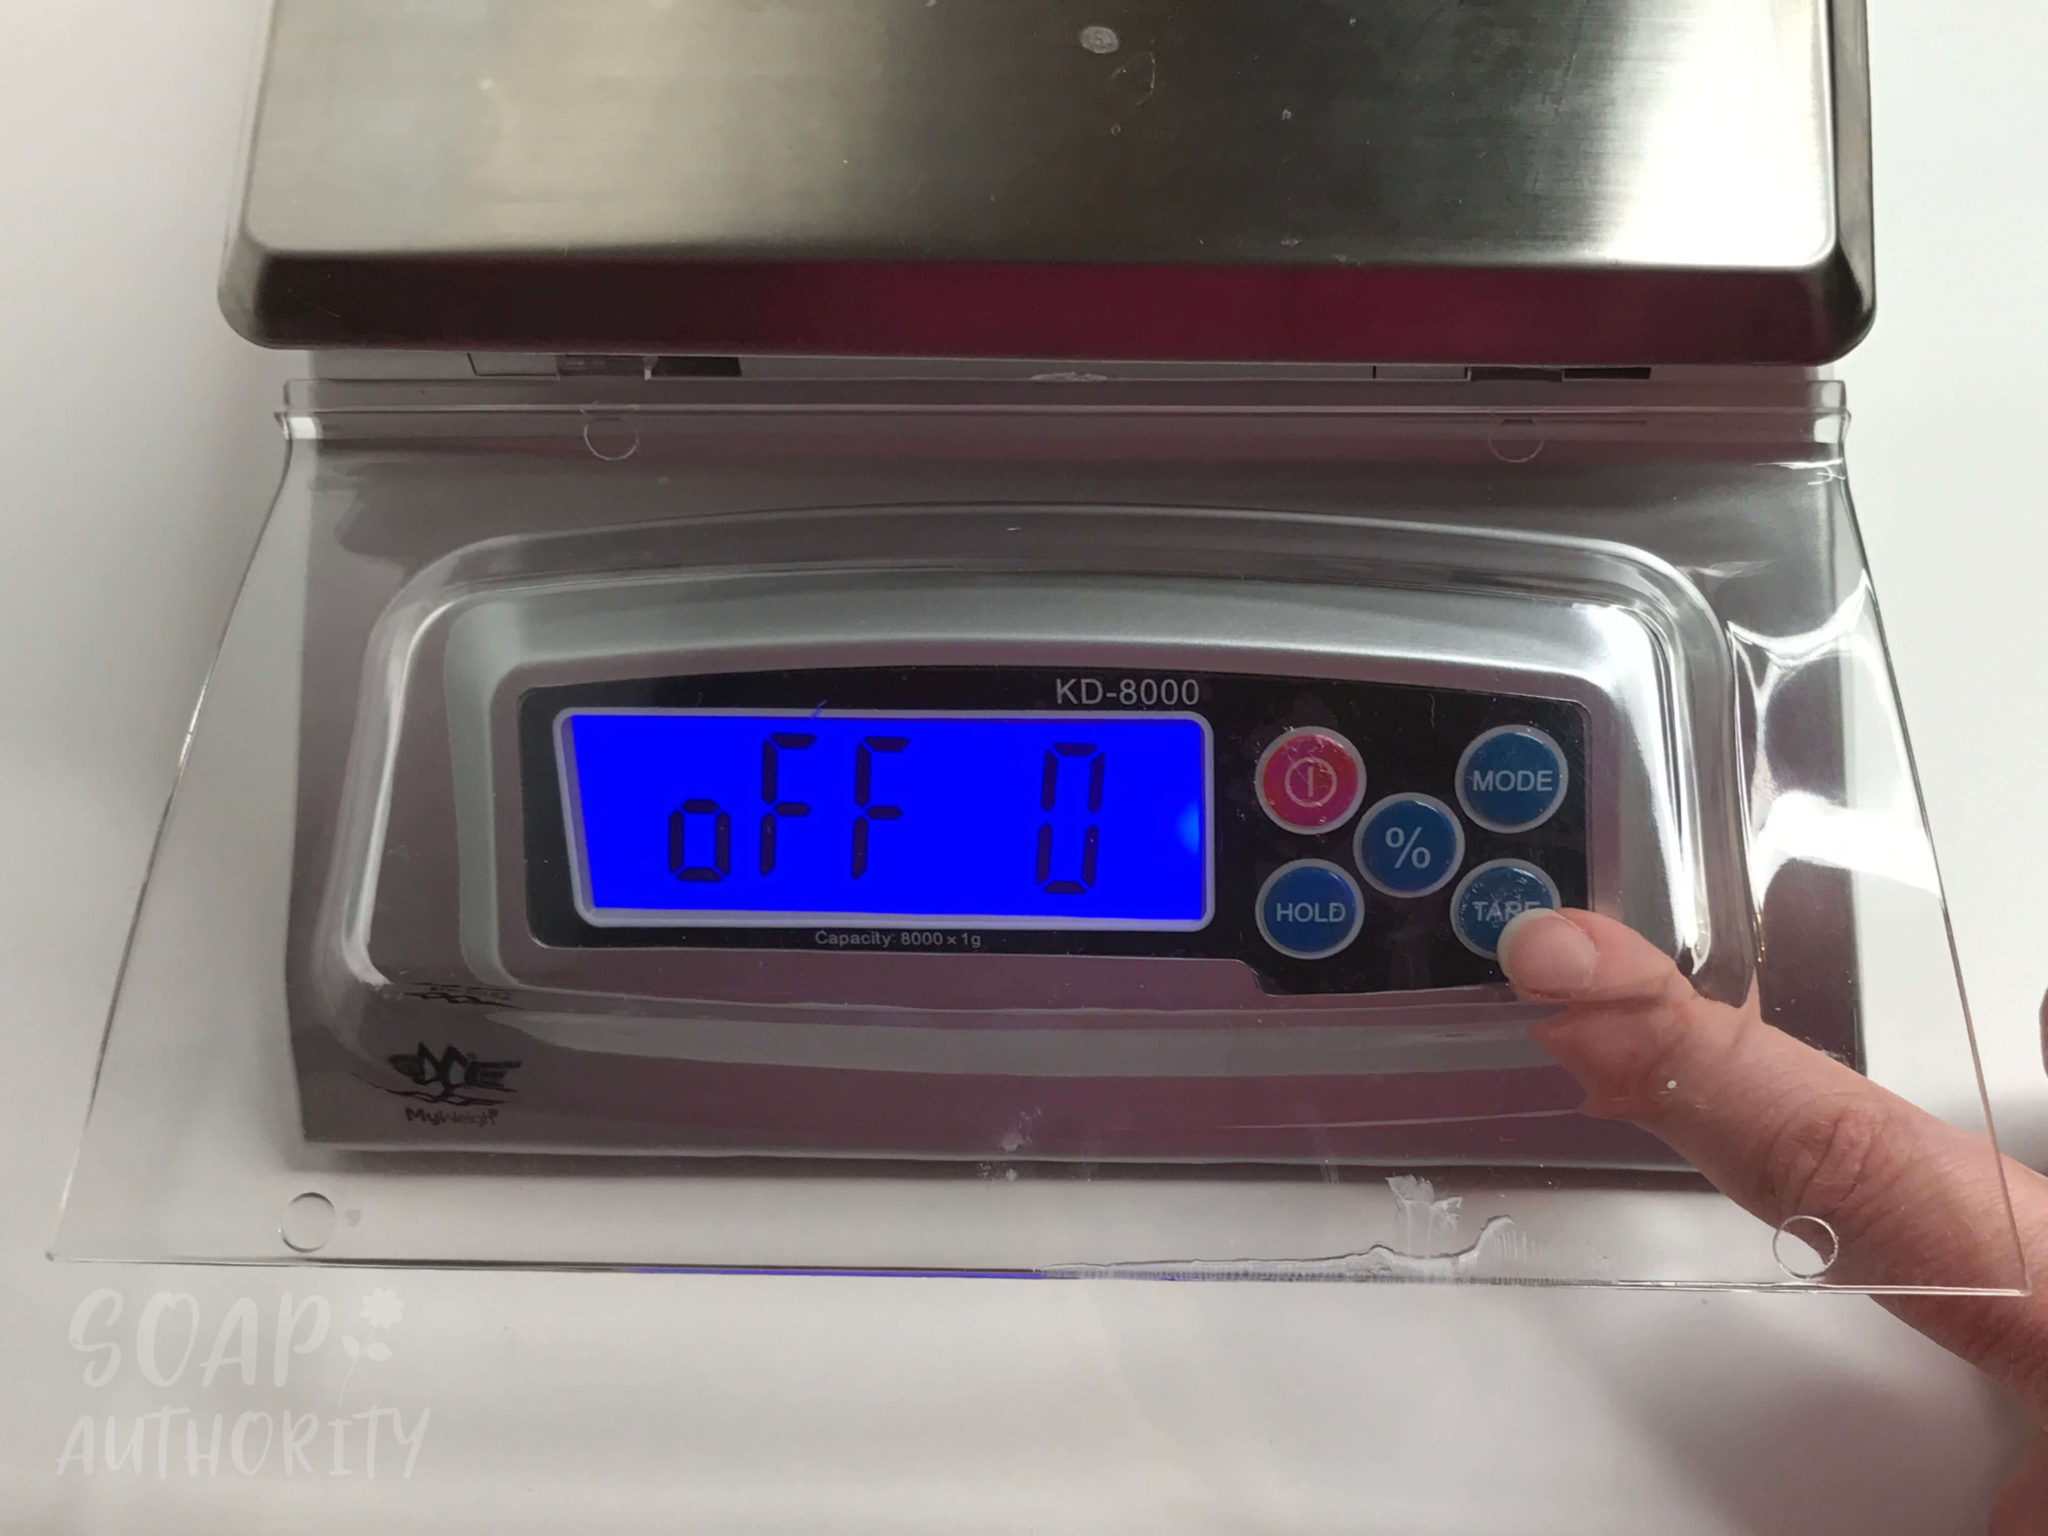 Preventing Your Soap Scale From Shutting OFF Automatically - Soap Authority: Preventing your soap scale from shutting off automatically will save you lots of time, frustration and even money! Follow my easy instructions to set up your scale properly.